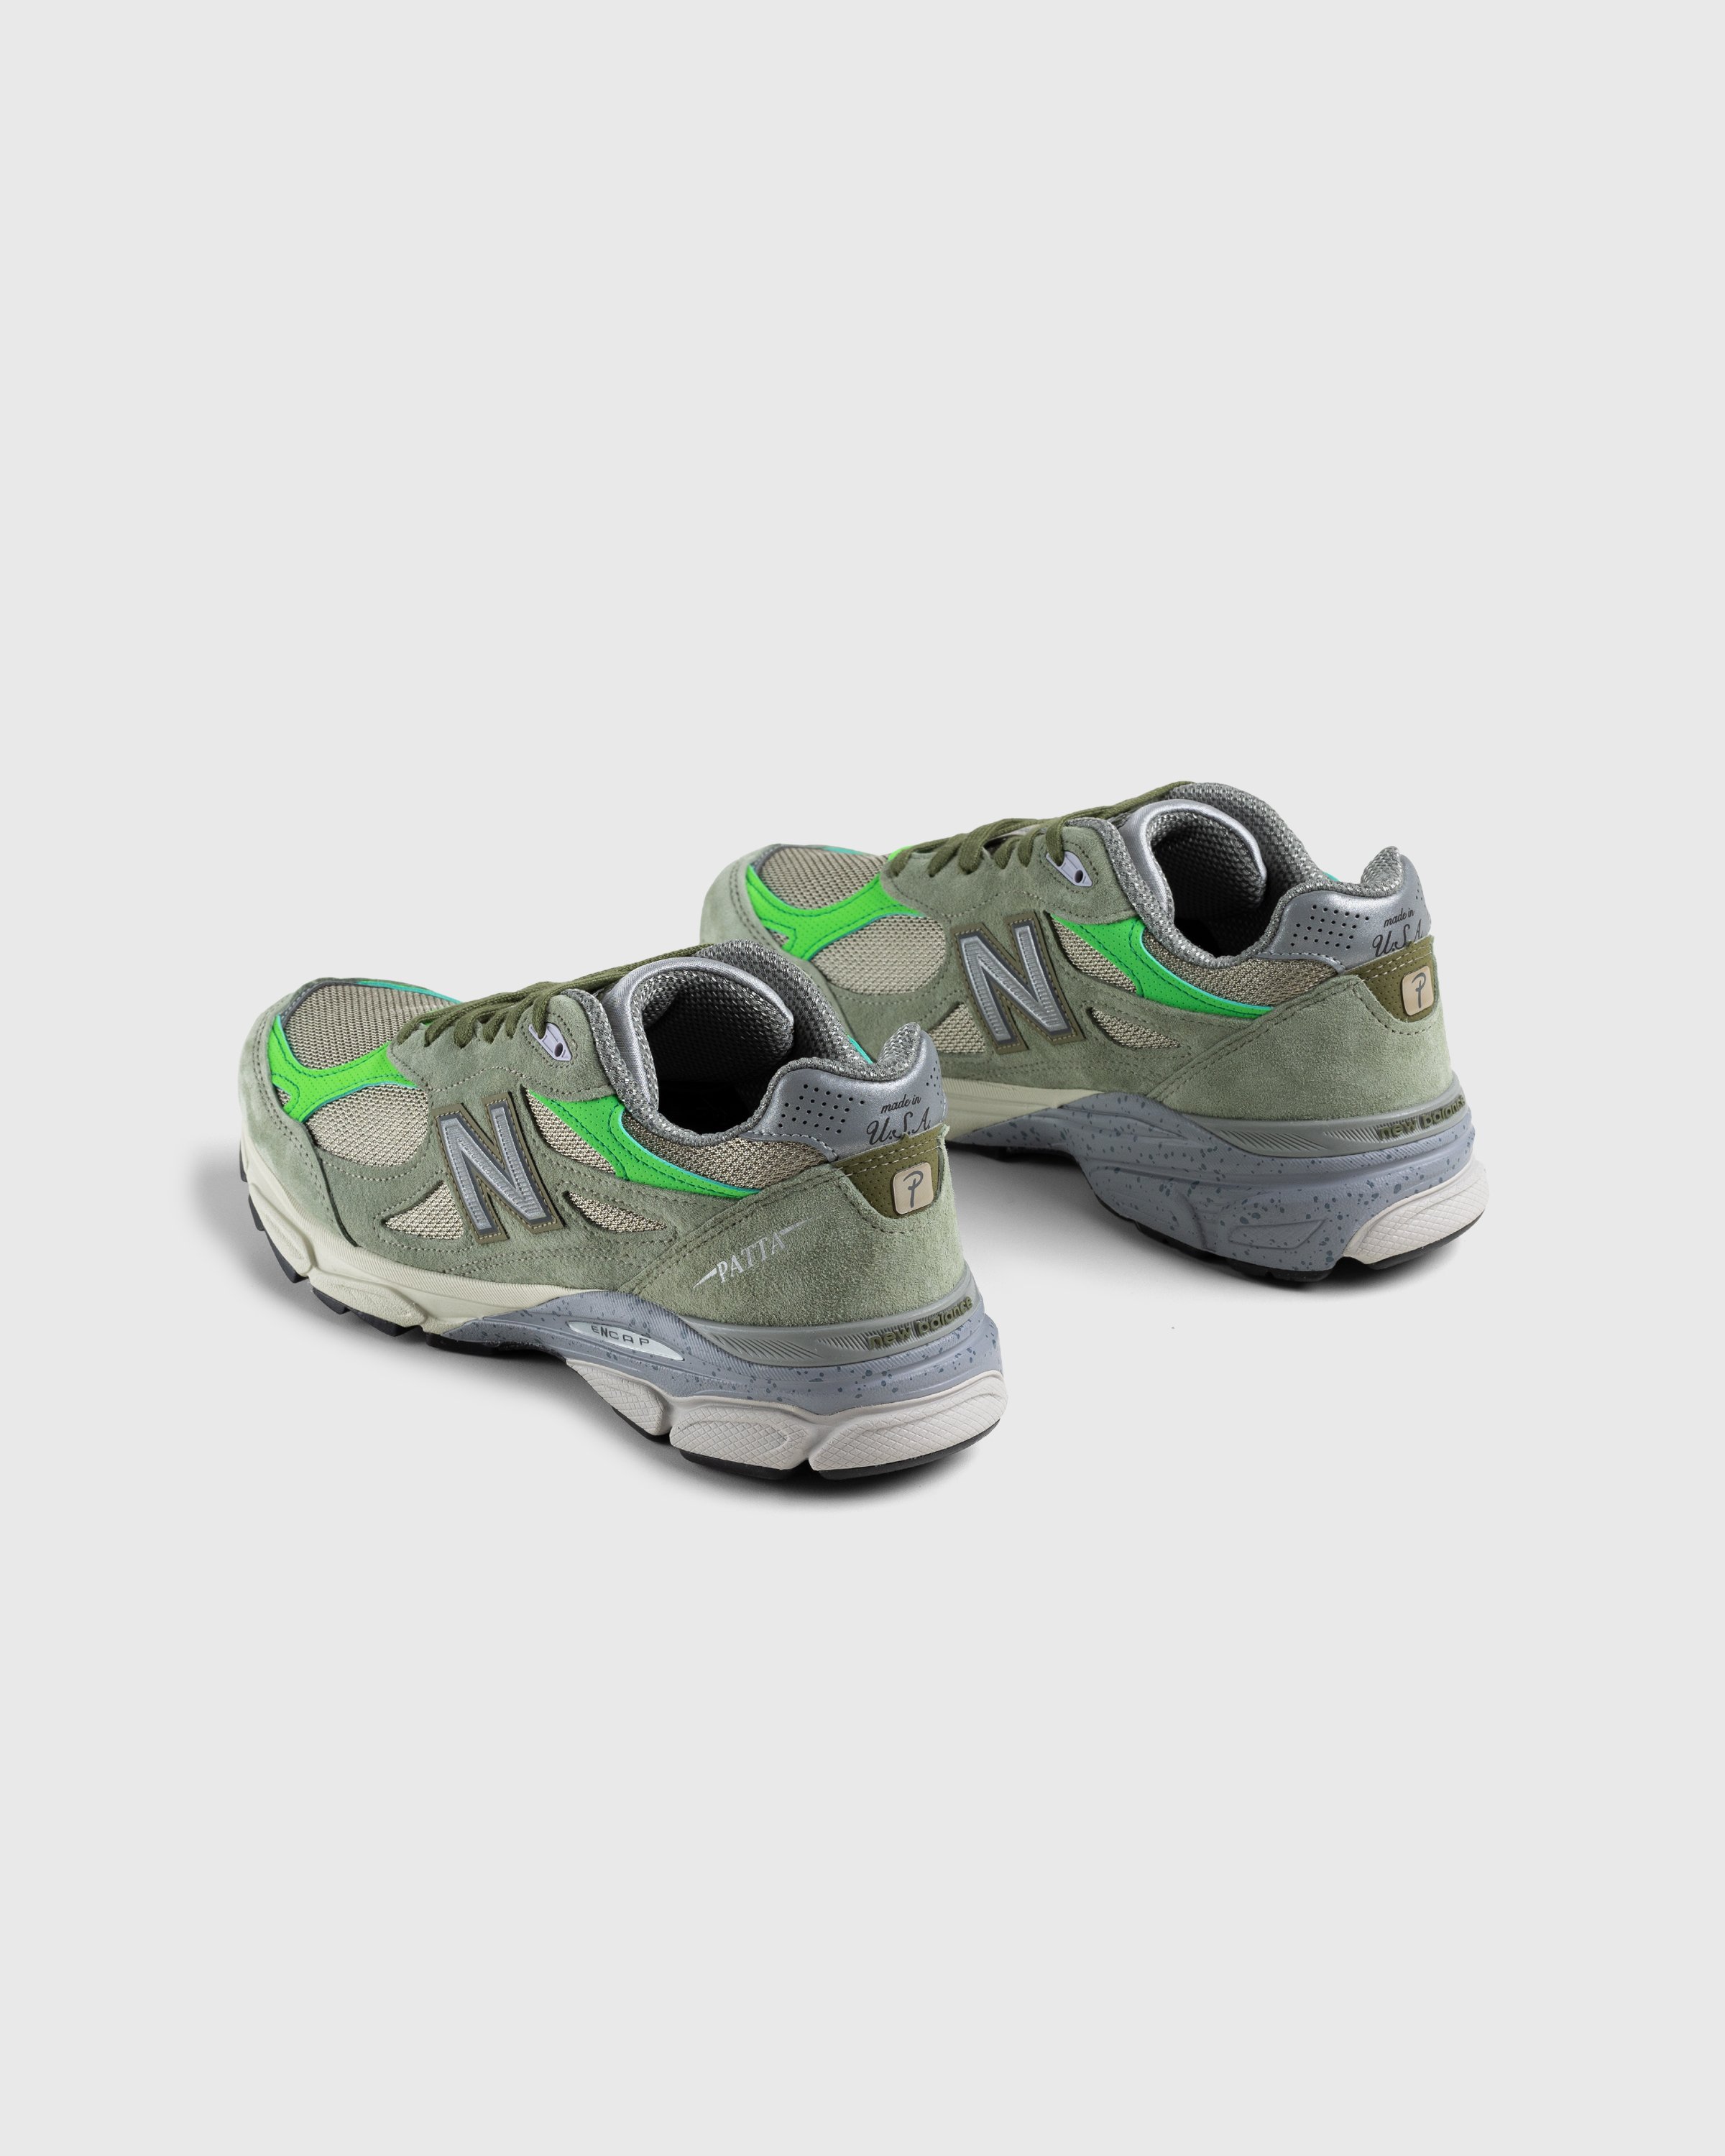 Patta x New Balance - M990PP3 Made in USA 990v3 Olive/White Pepper - Footwear - Green - Image 2